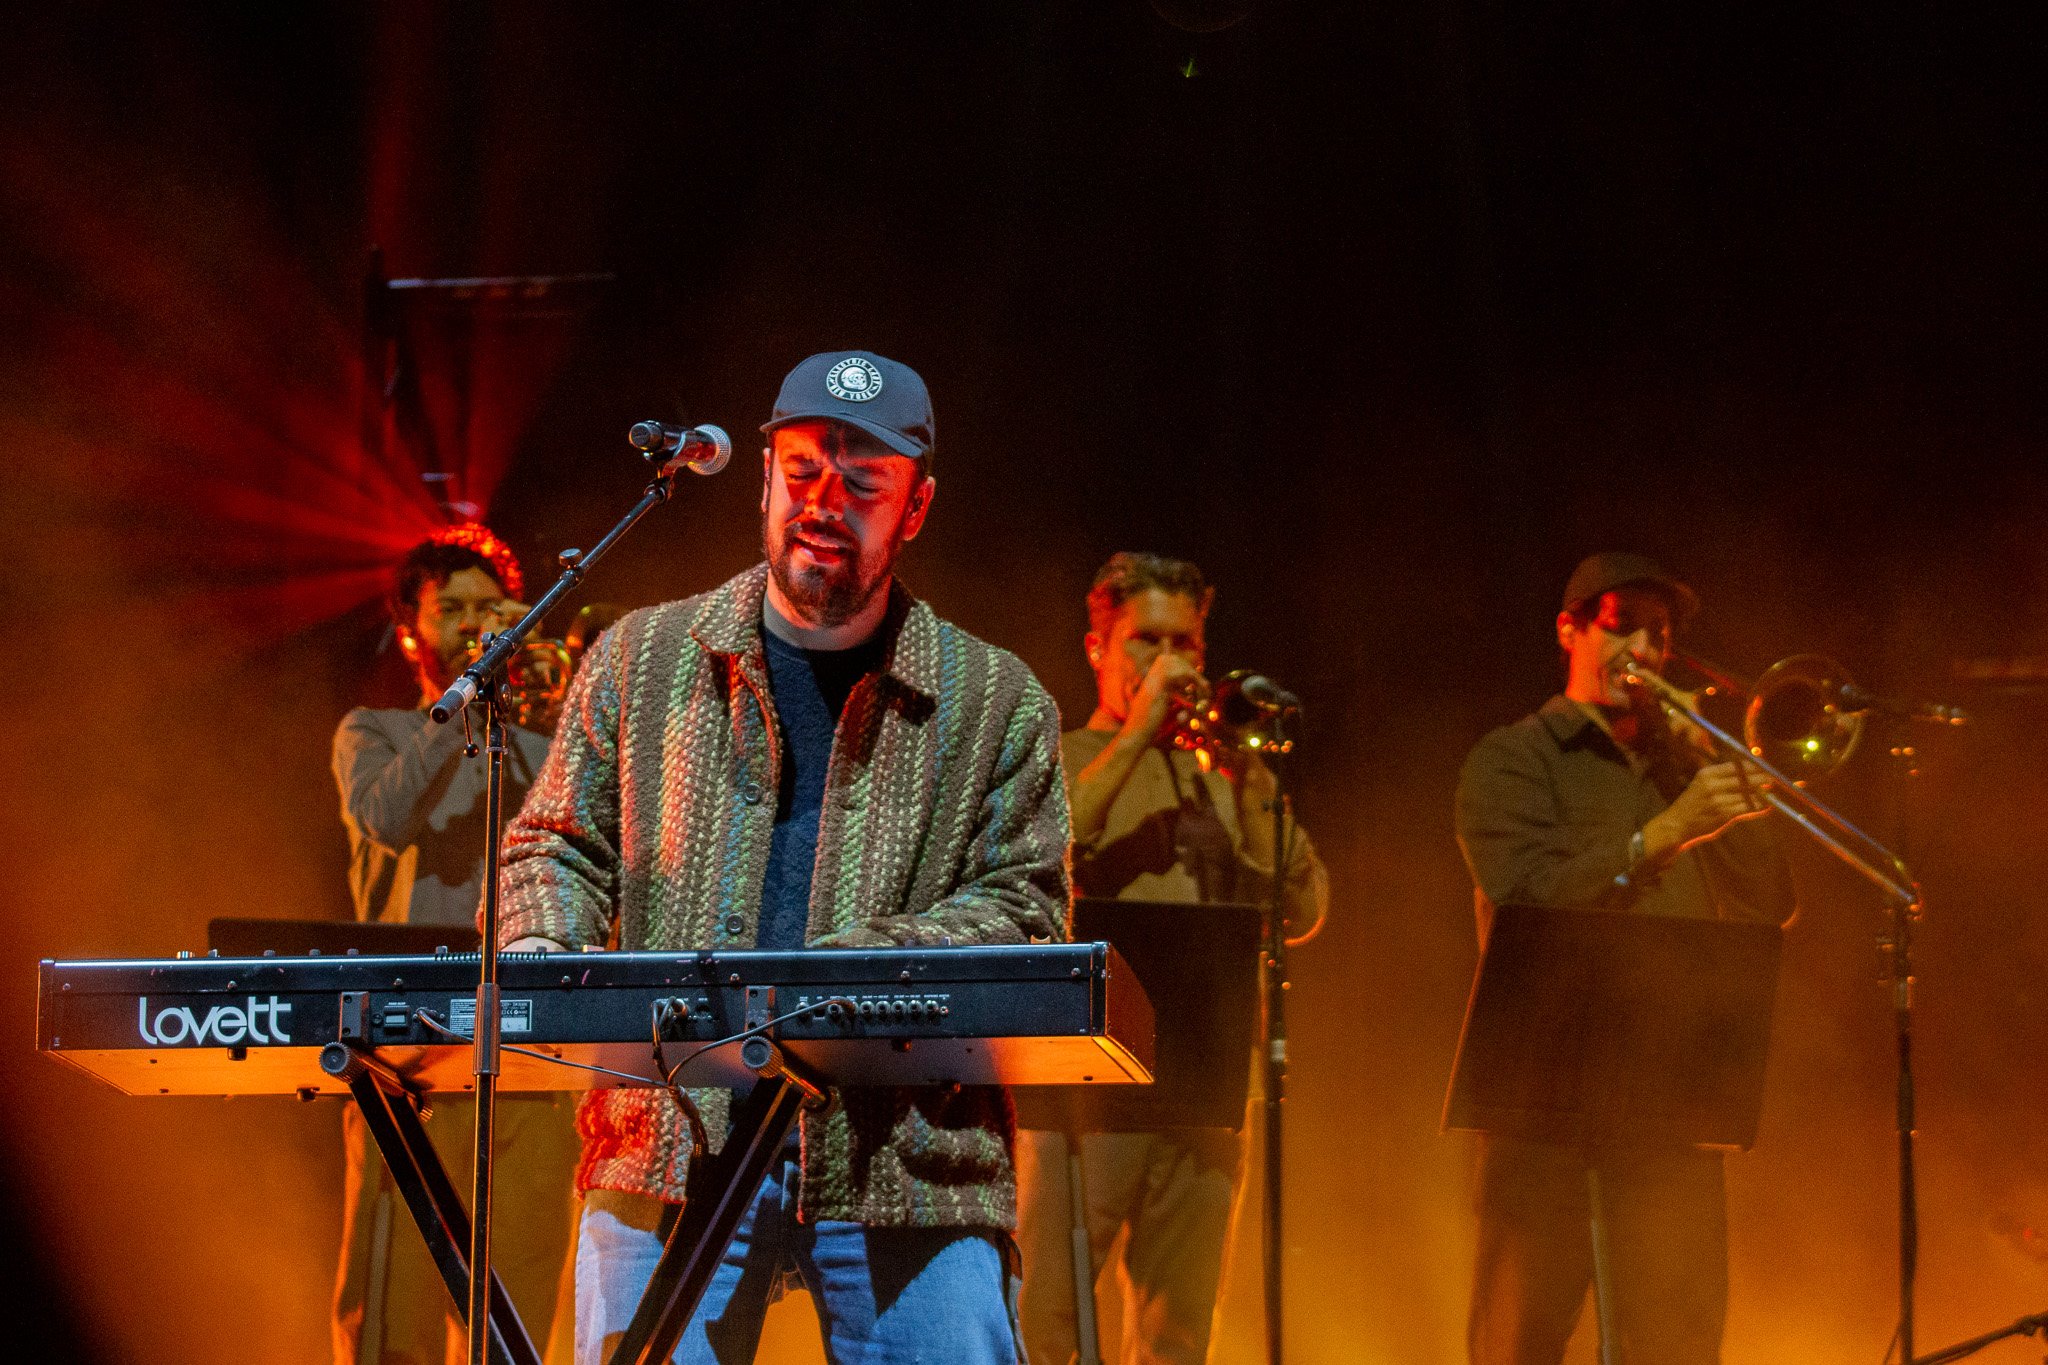  Ben Lovett, backed by trombone players, plays keyboard for Mumford &amp; Sons’ song “Guiding Light.” 